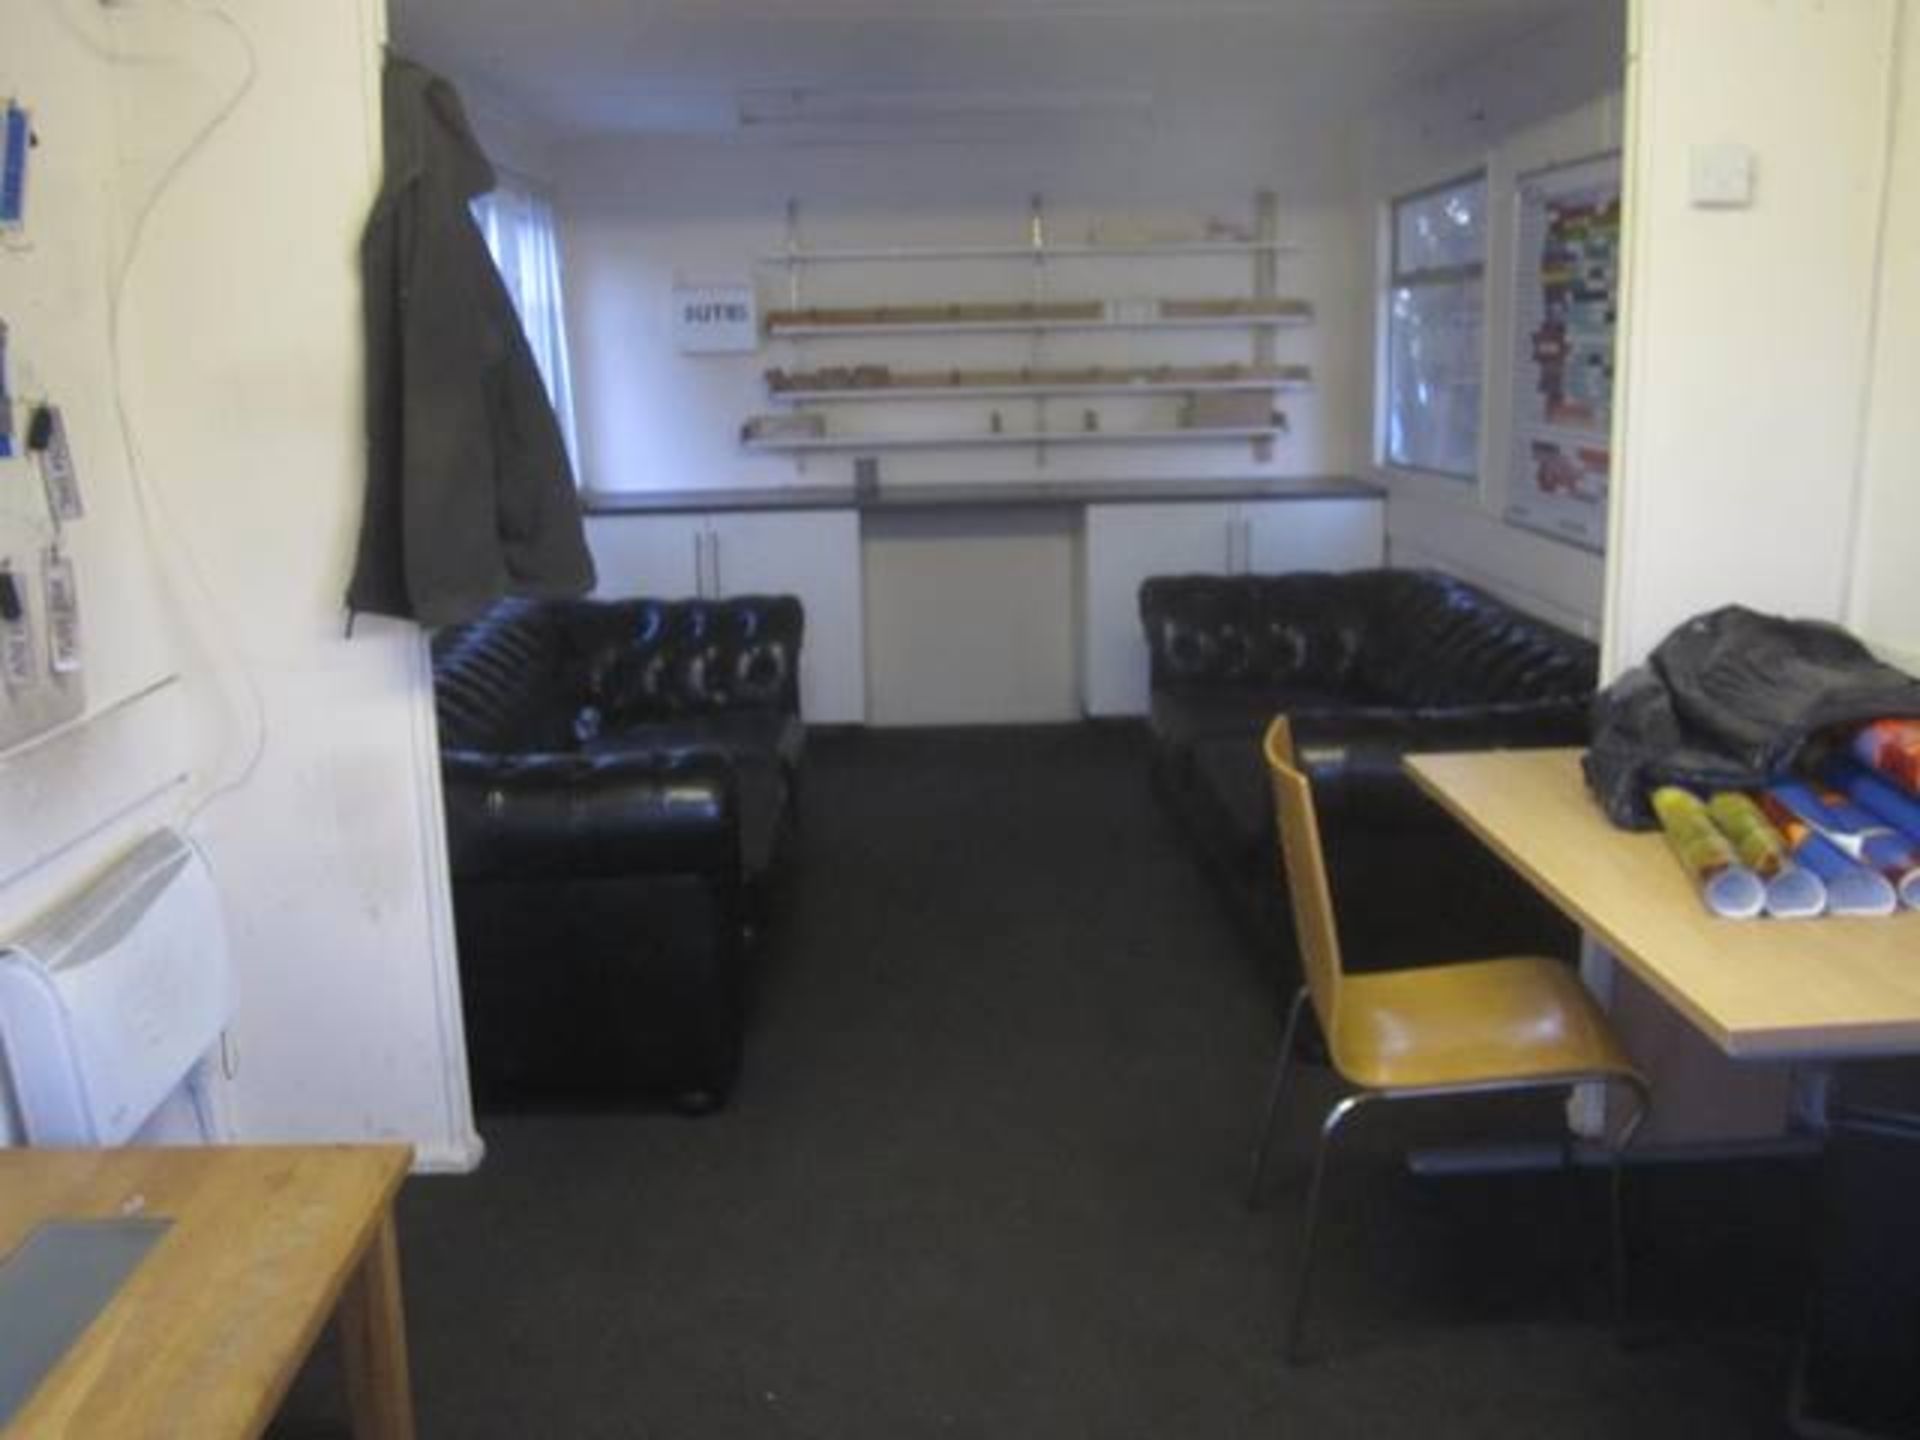 PortaKabin jackleg portacabin /office accomodation, approx 7m length, fitted kitchen area, - Image 3 of 4